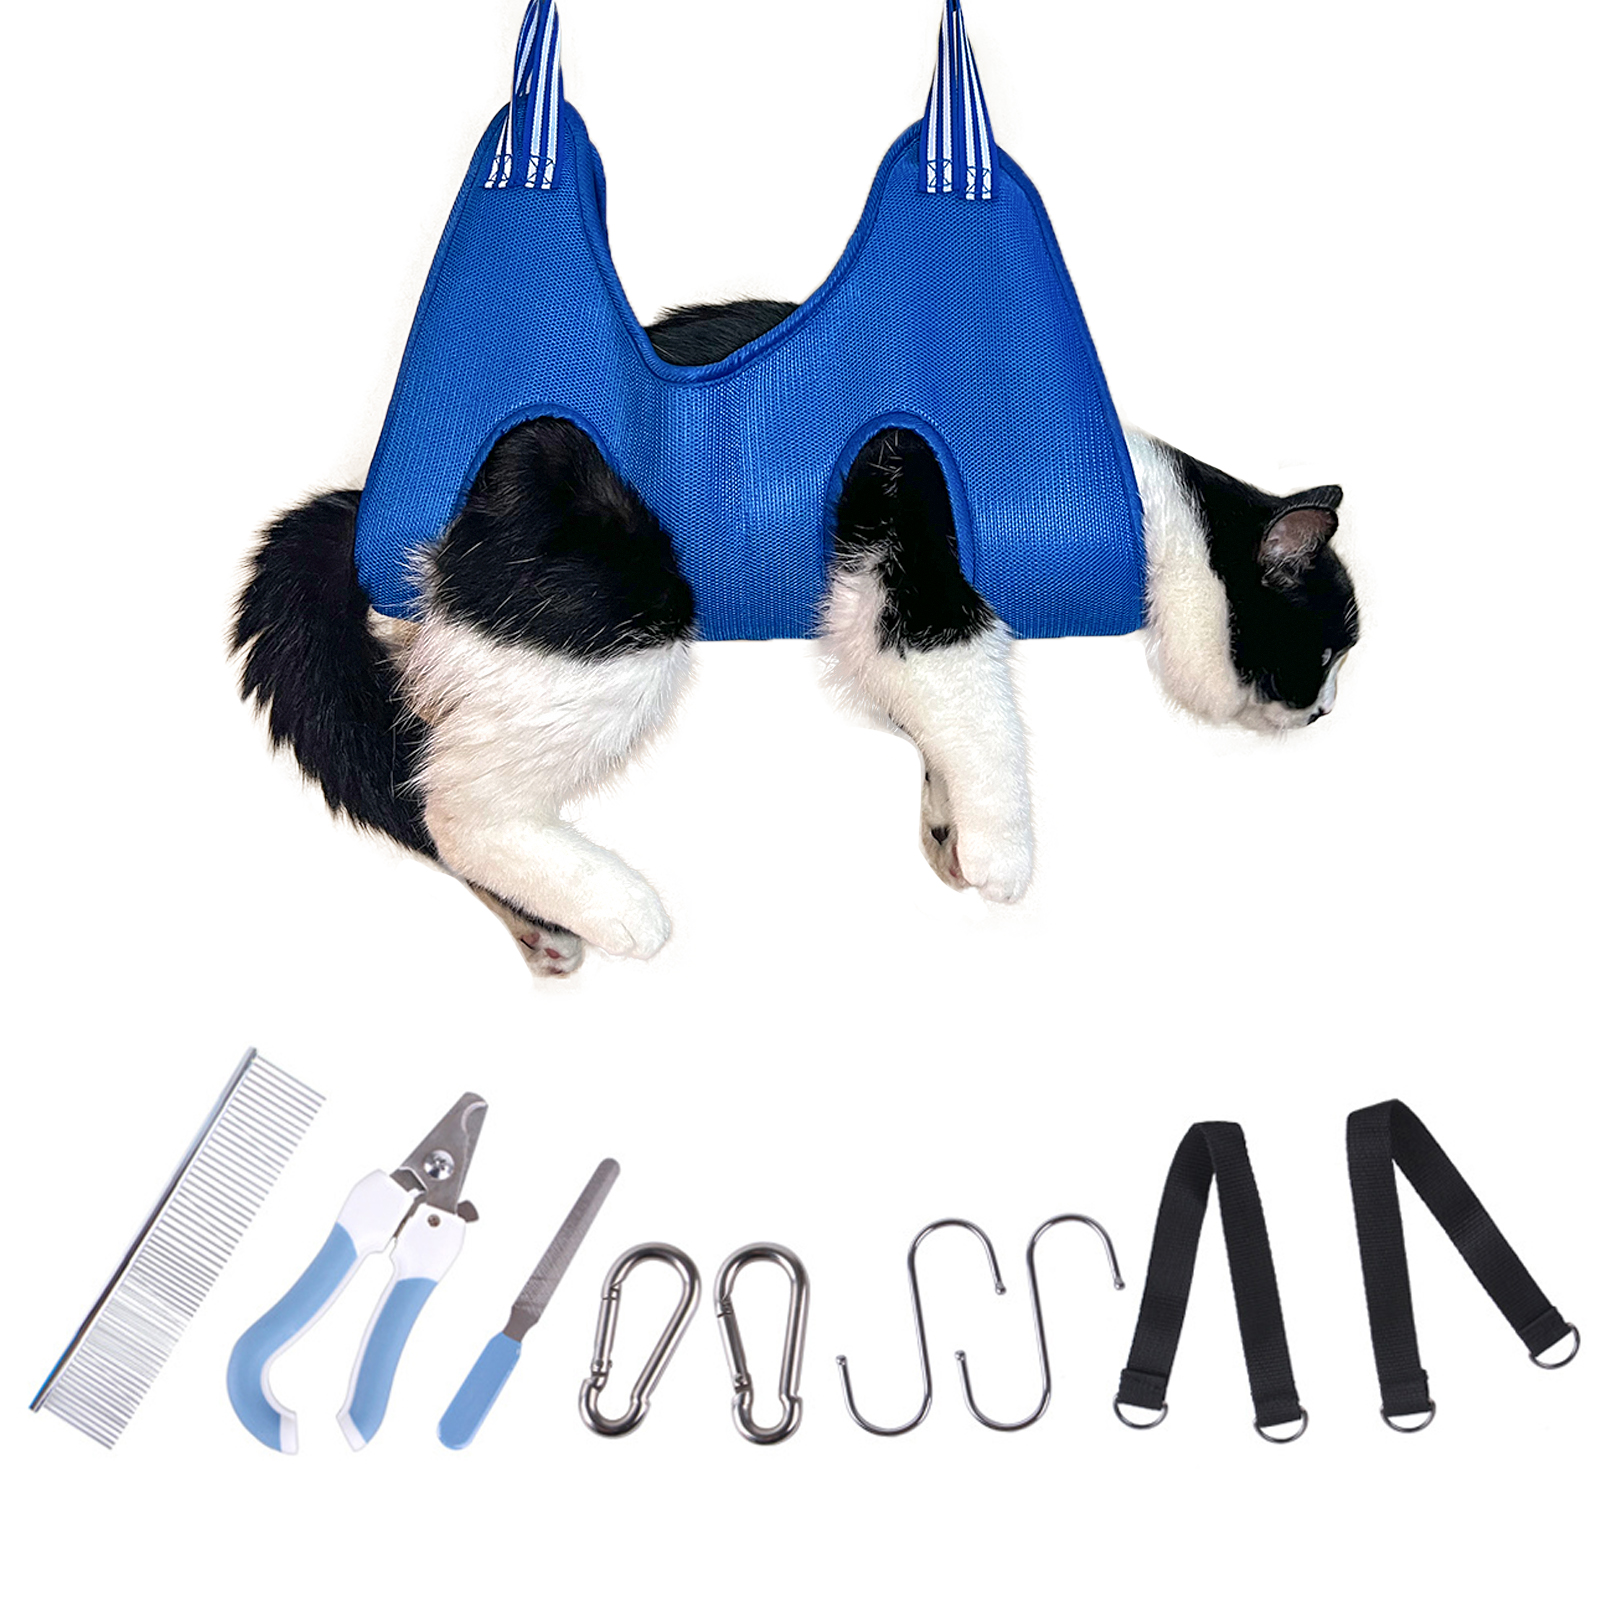 10 in 1 Pet Grooming Hammock for Dog & Cat with Nail Trimmers/Nail Clipper/Slings/Comb for Grooming,Breathable Dog Hammock Restraint Bag Dog Grooming Harness for Dog & Cat